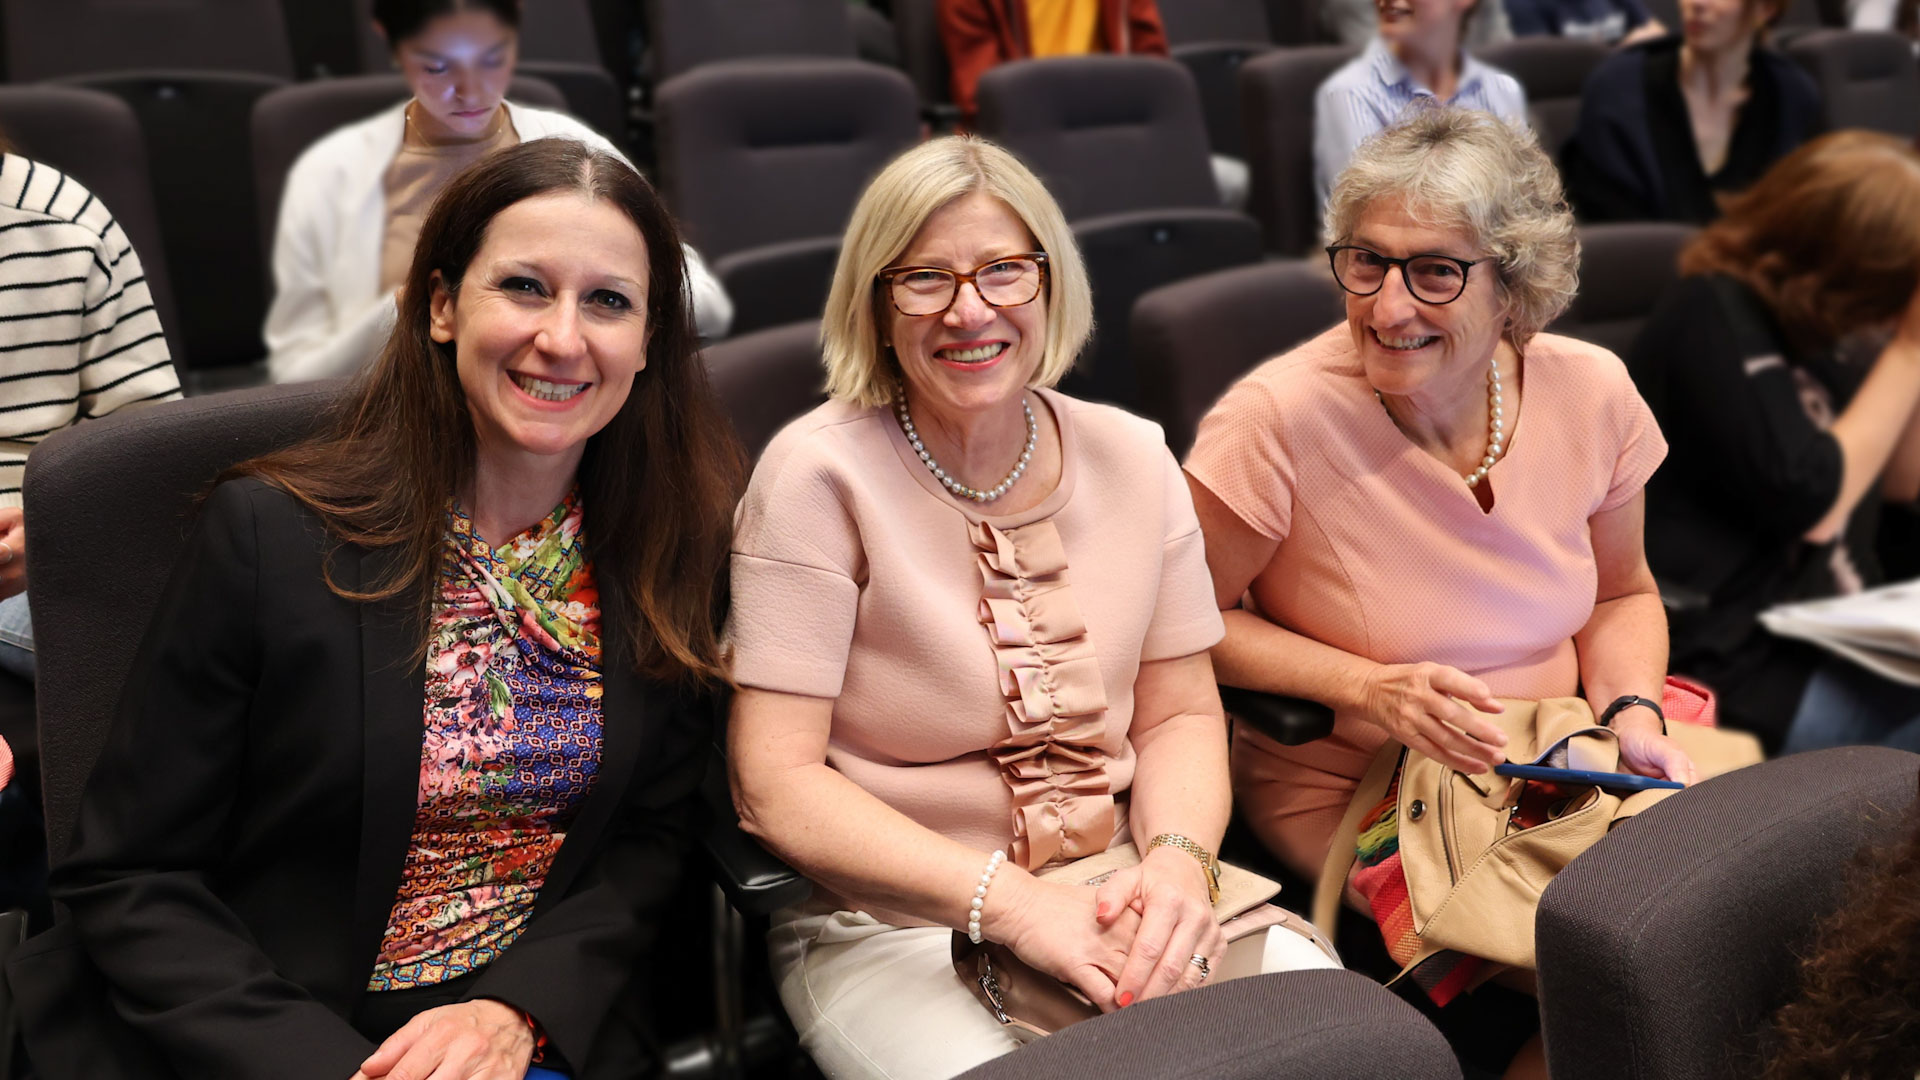 Karin Werer, Ulrike Schlachter and Maddalena Velona sit next to each other, smiling